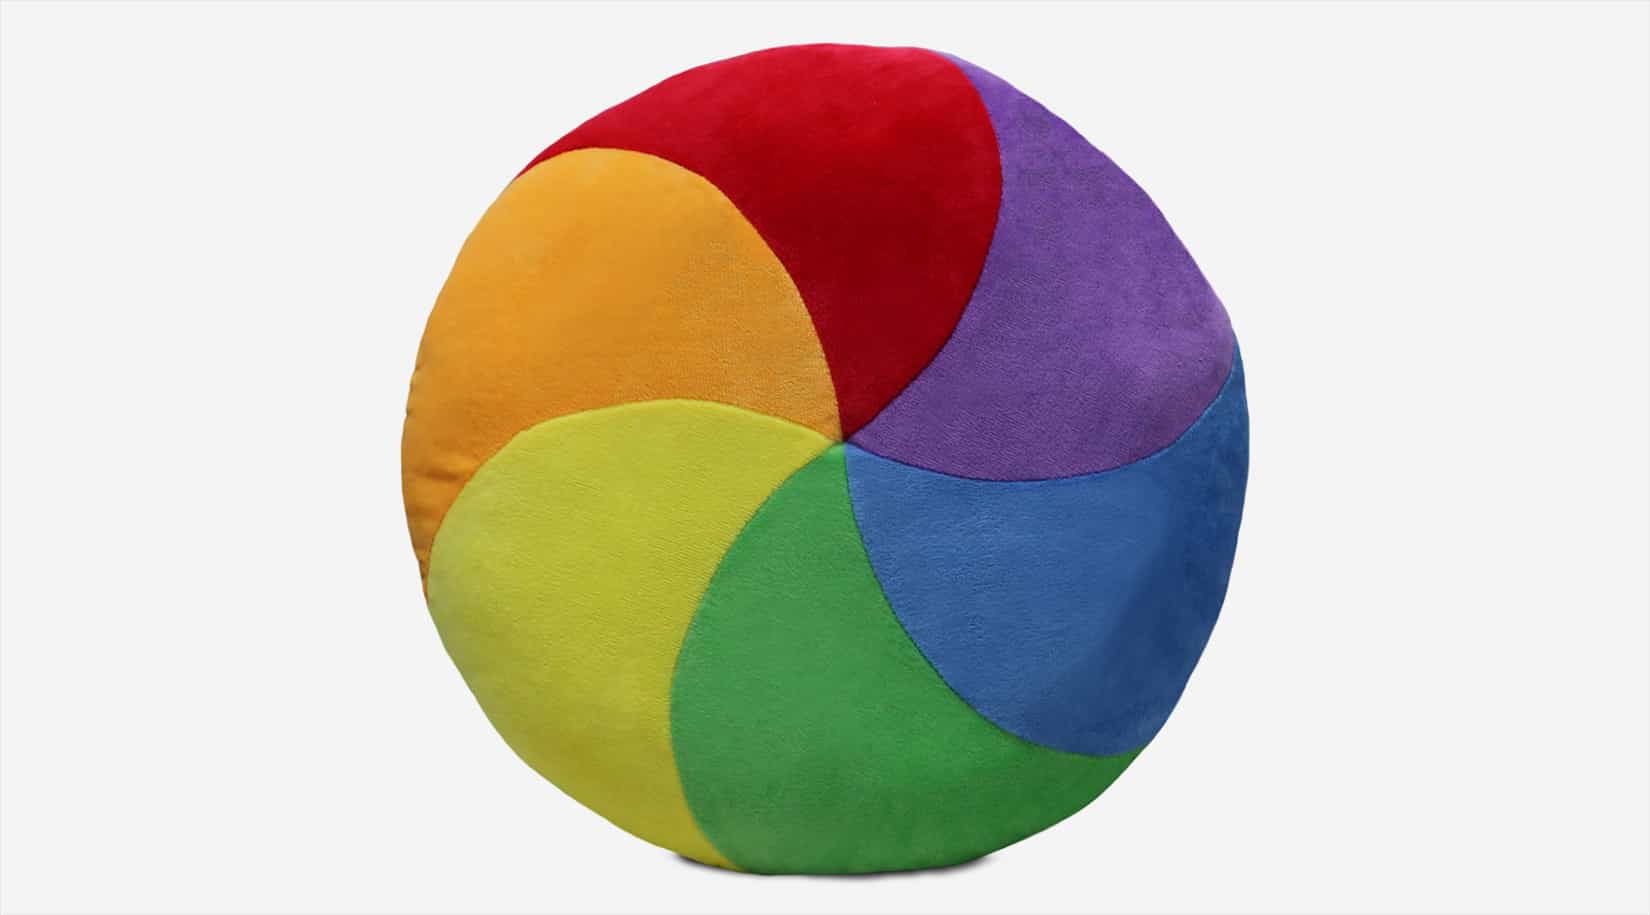 Mac's spinning wheel icon also makes an attractive throw pillow1650 x 915